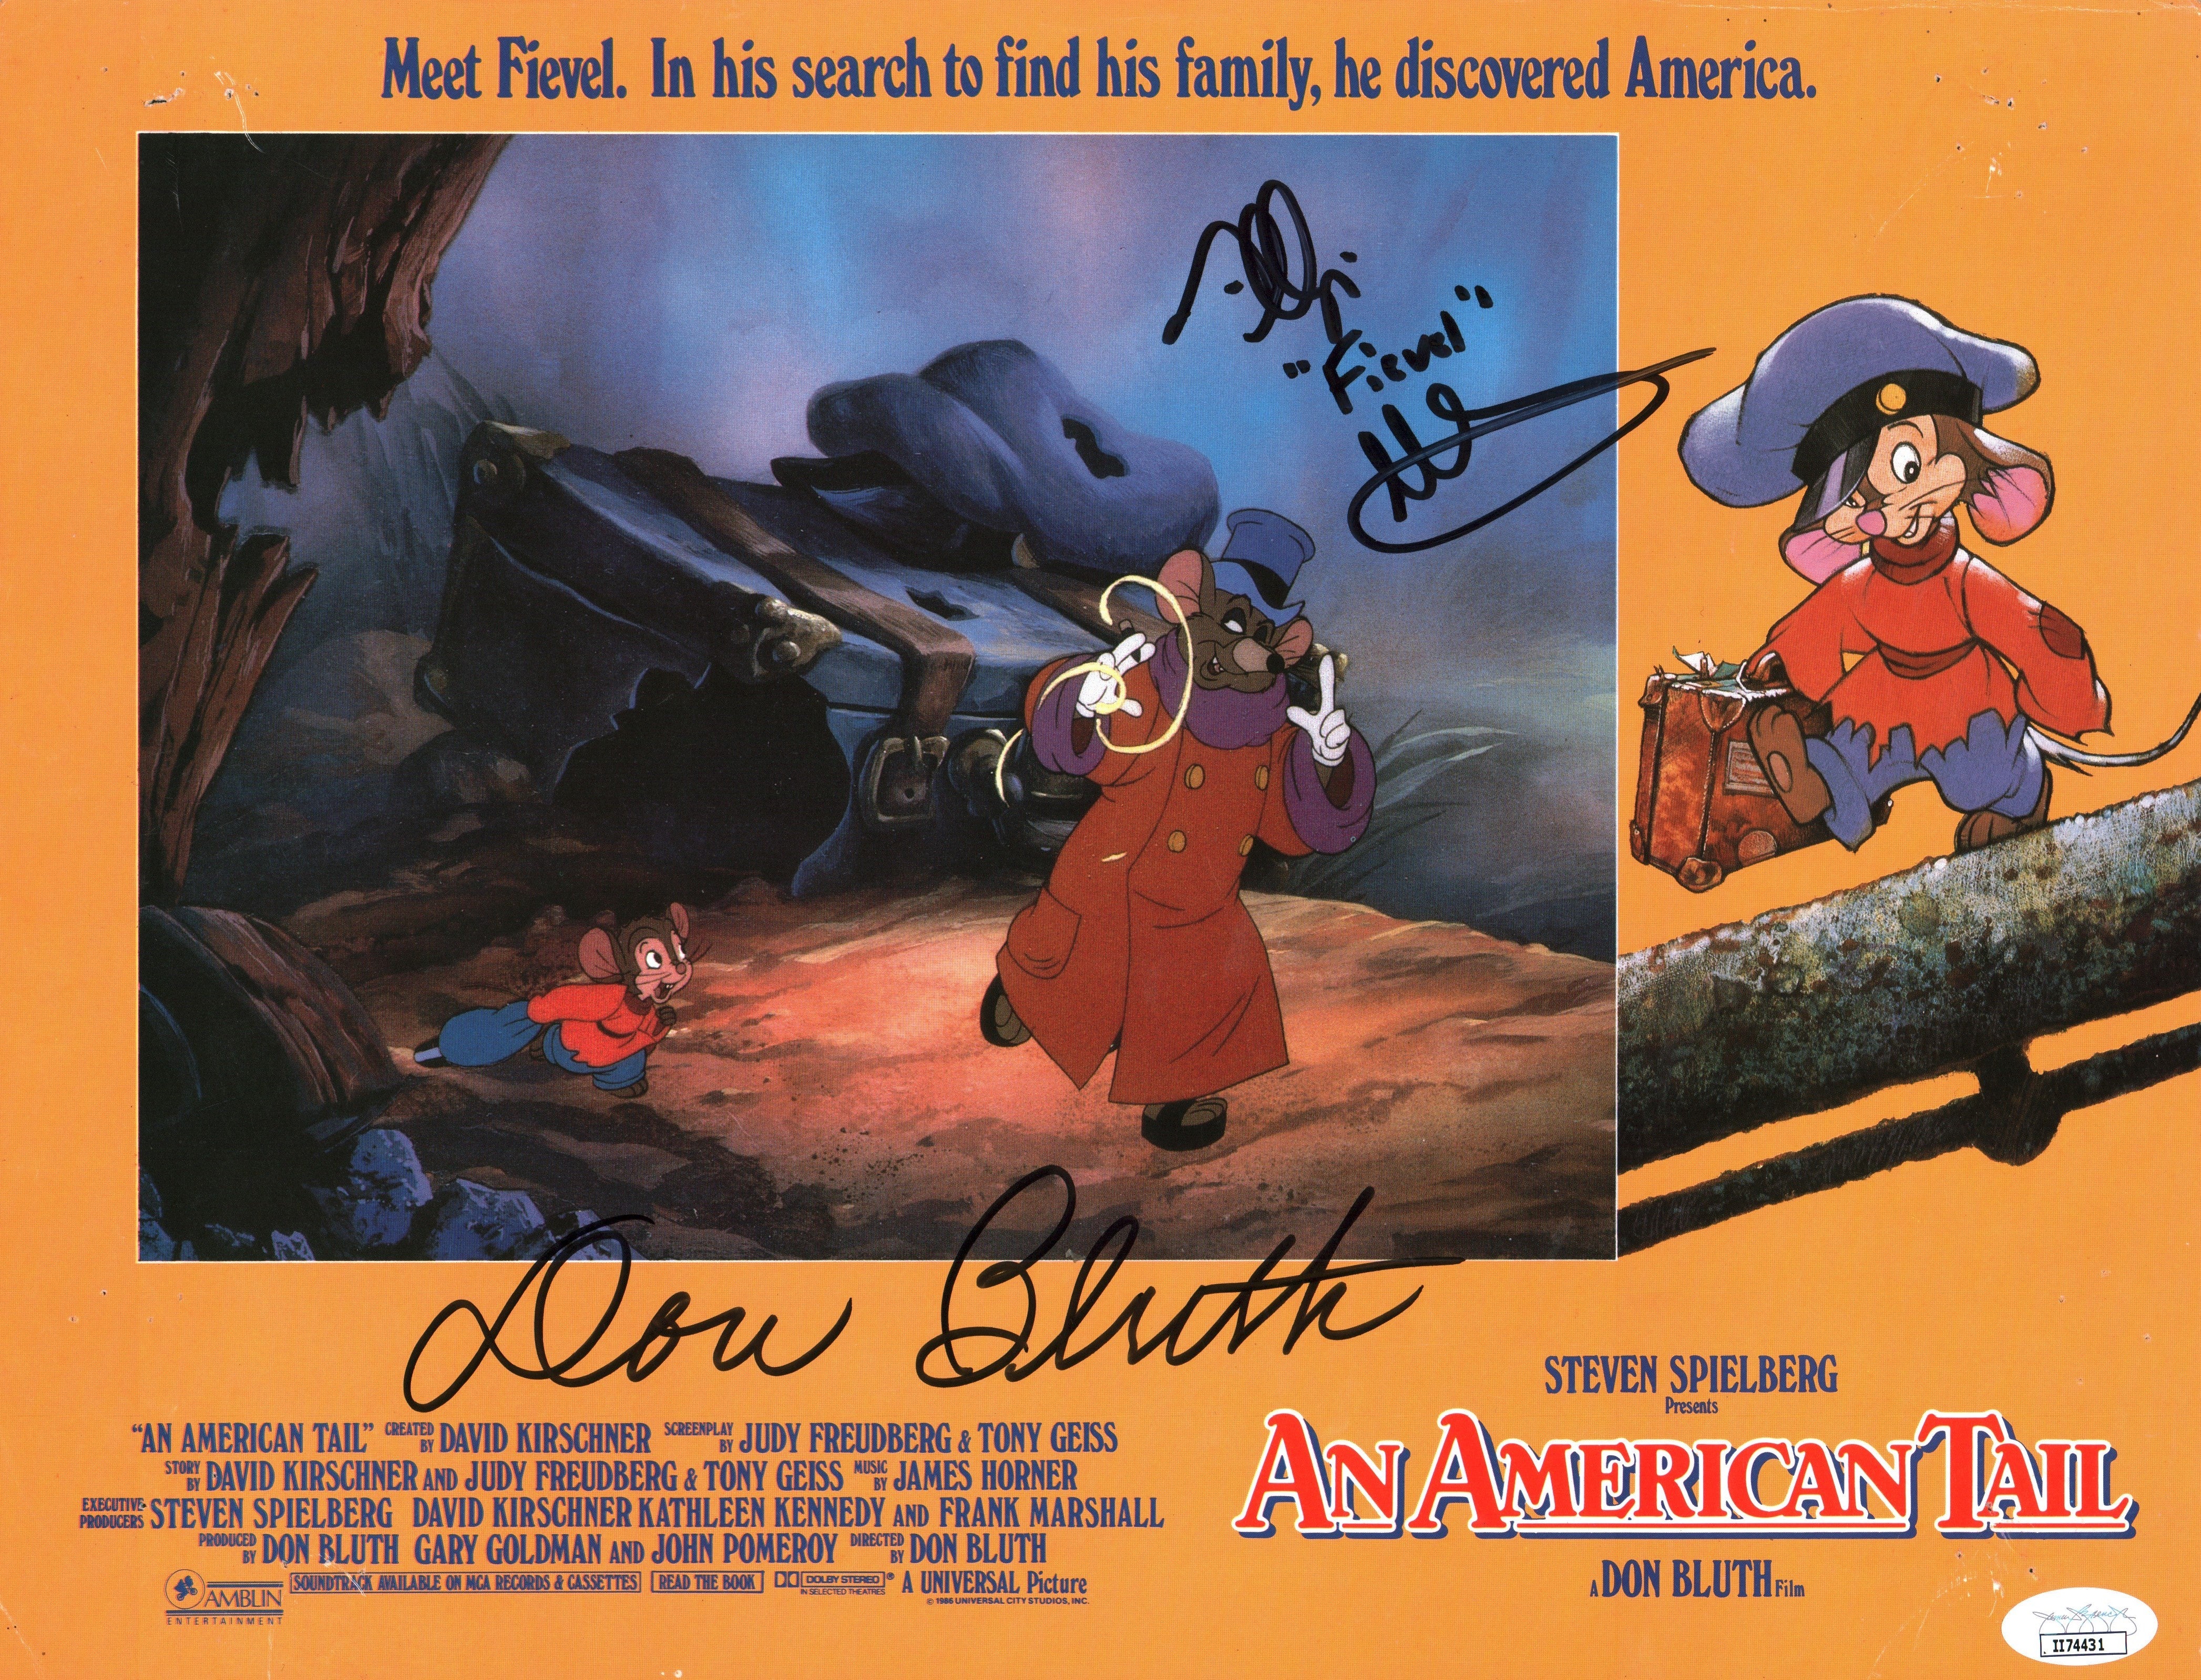 An American Tail Signed Glasser Bluth 11x14 Lobby Card Photo JSA Certified Autograph